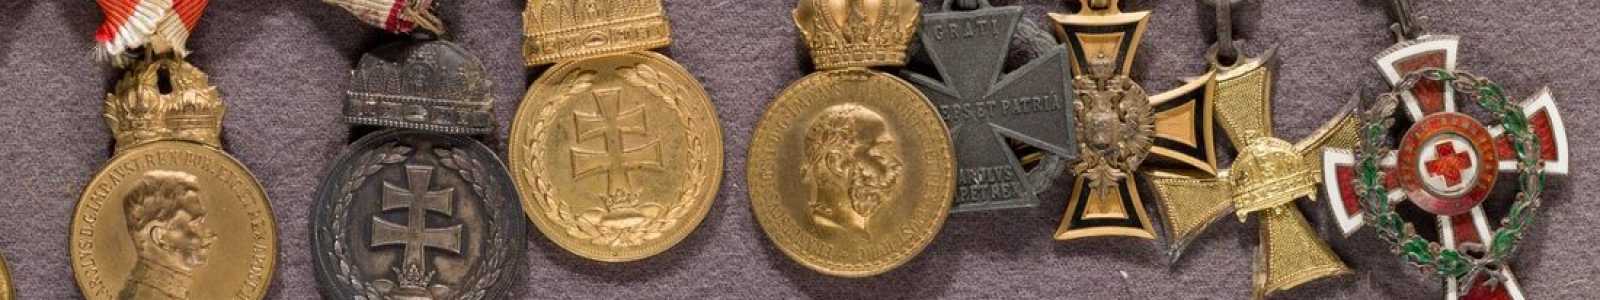 A82m - International medals & military history collectibles